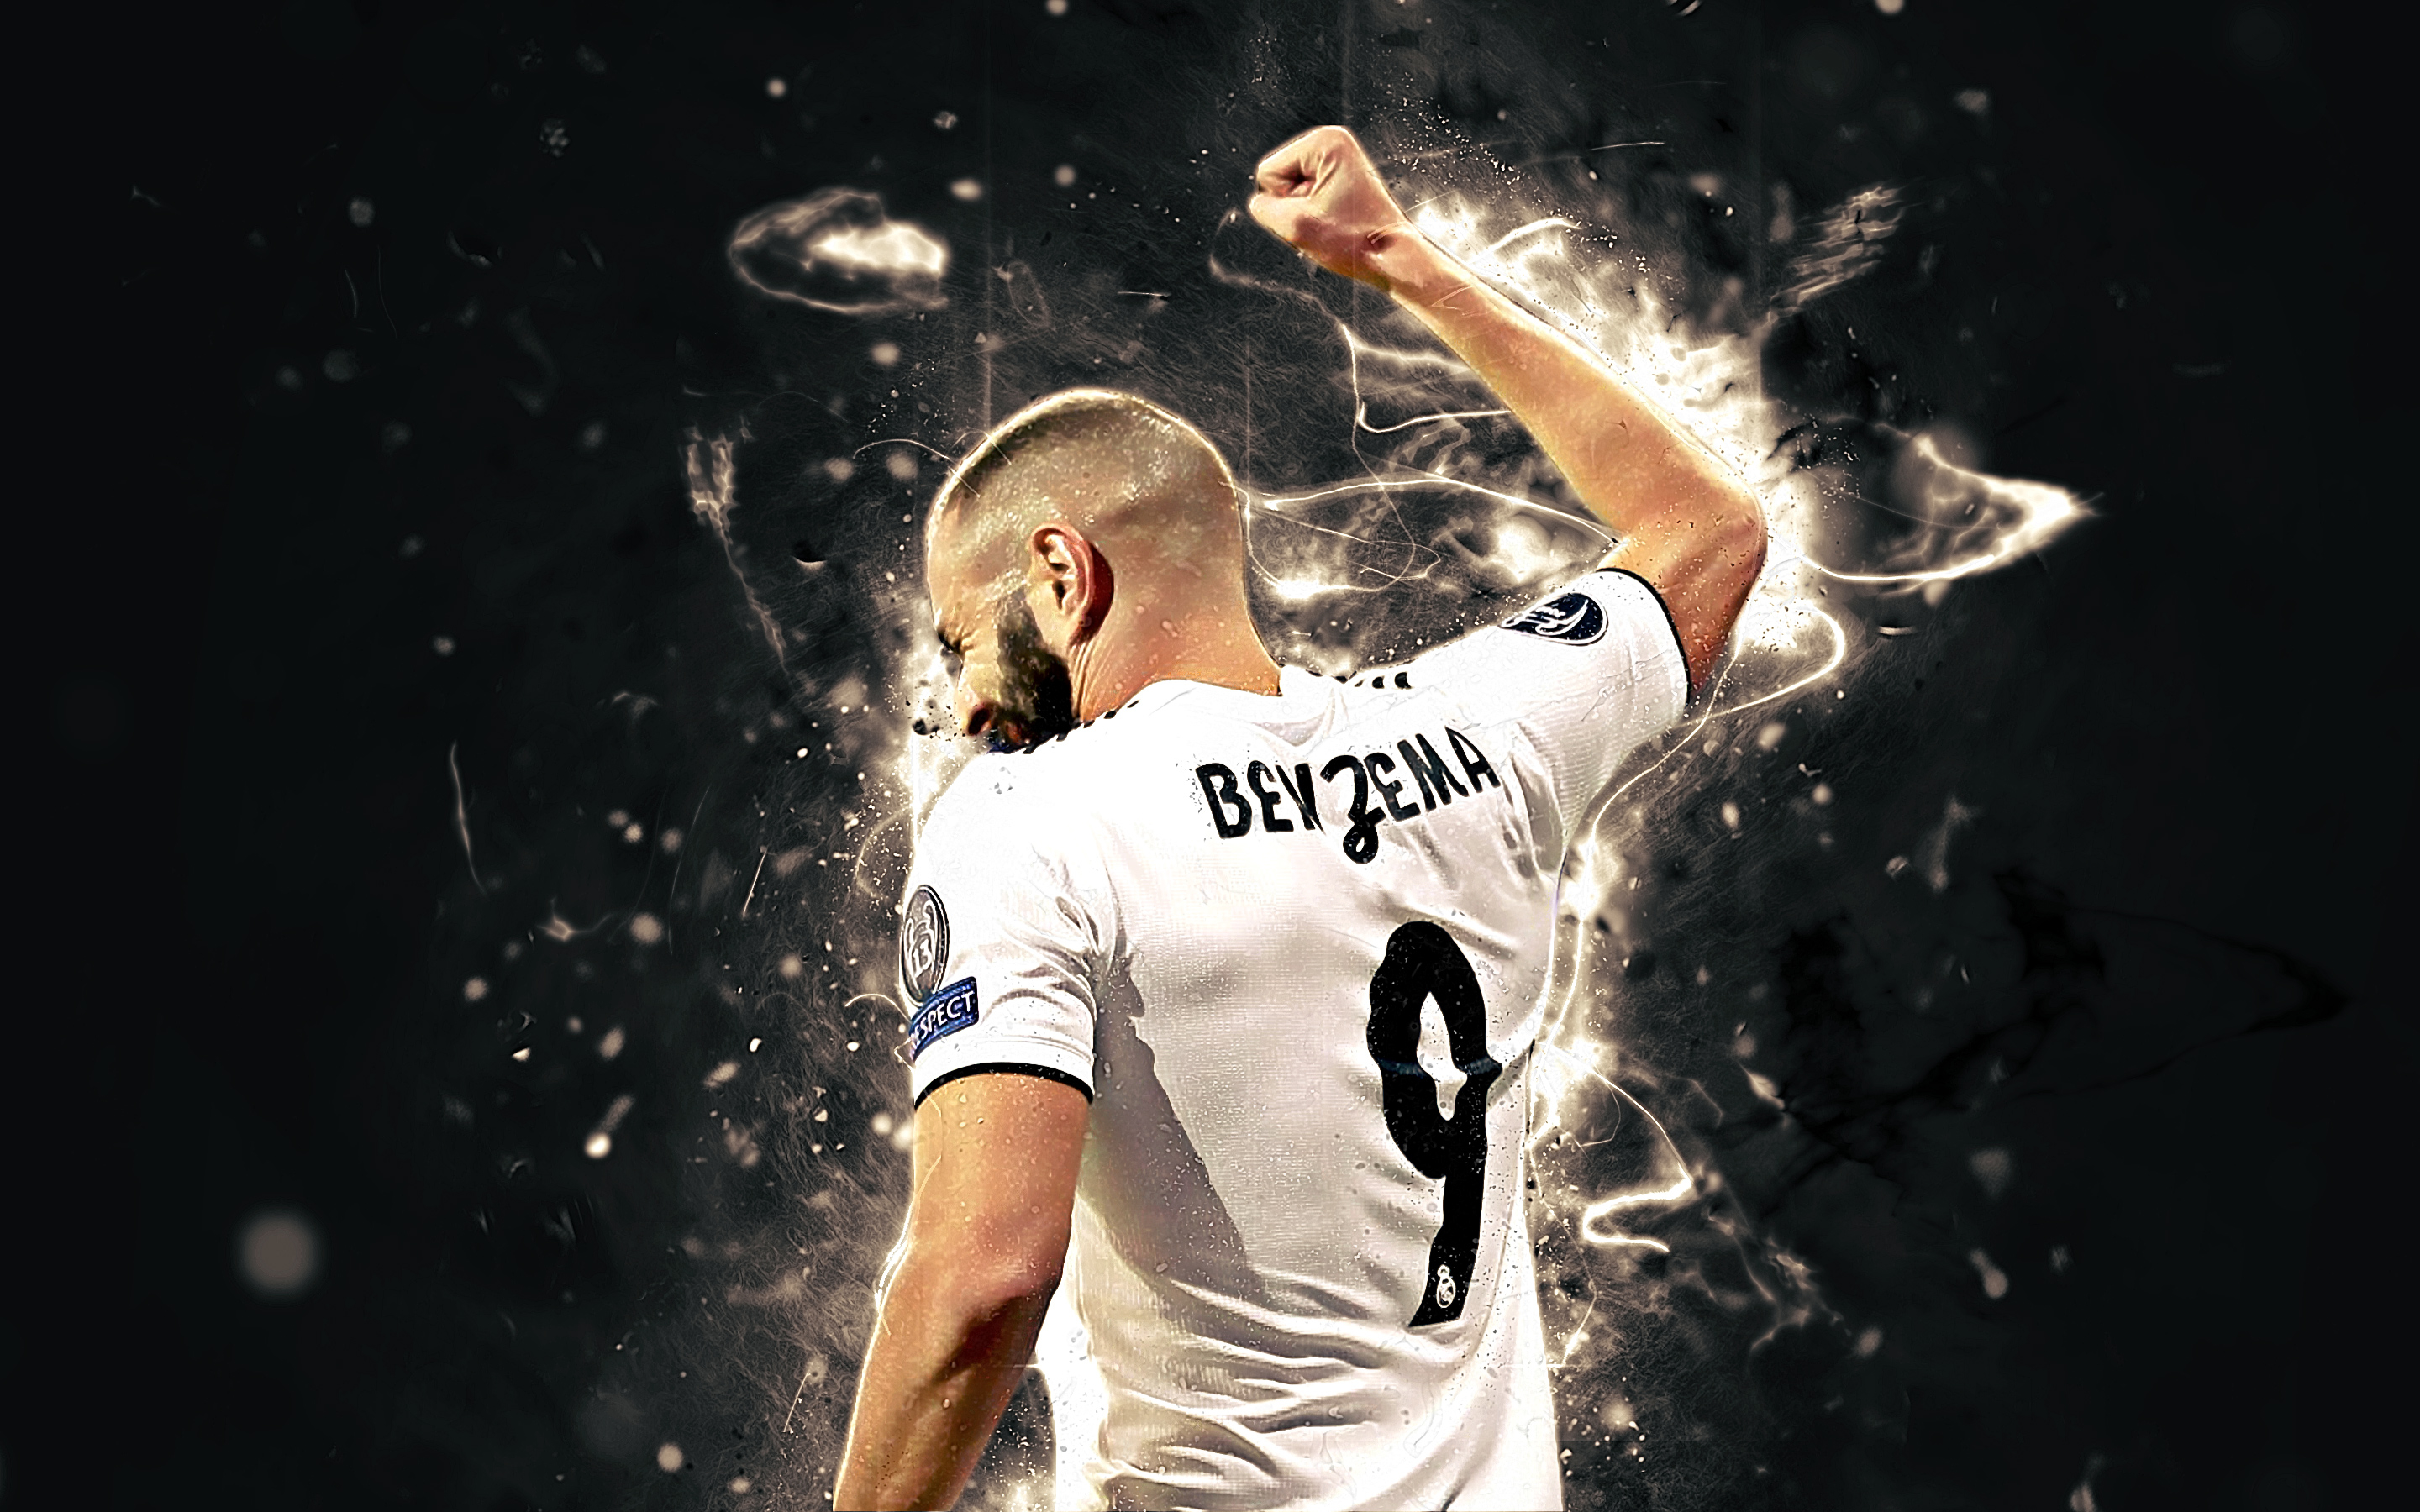 Karim benzema p k k hd wallpapers backgrounds free download rare gallery